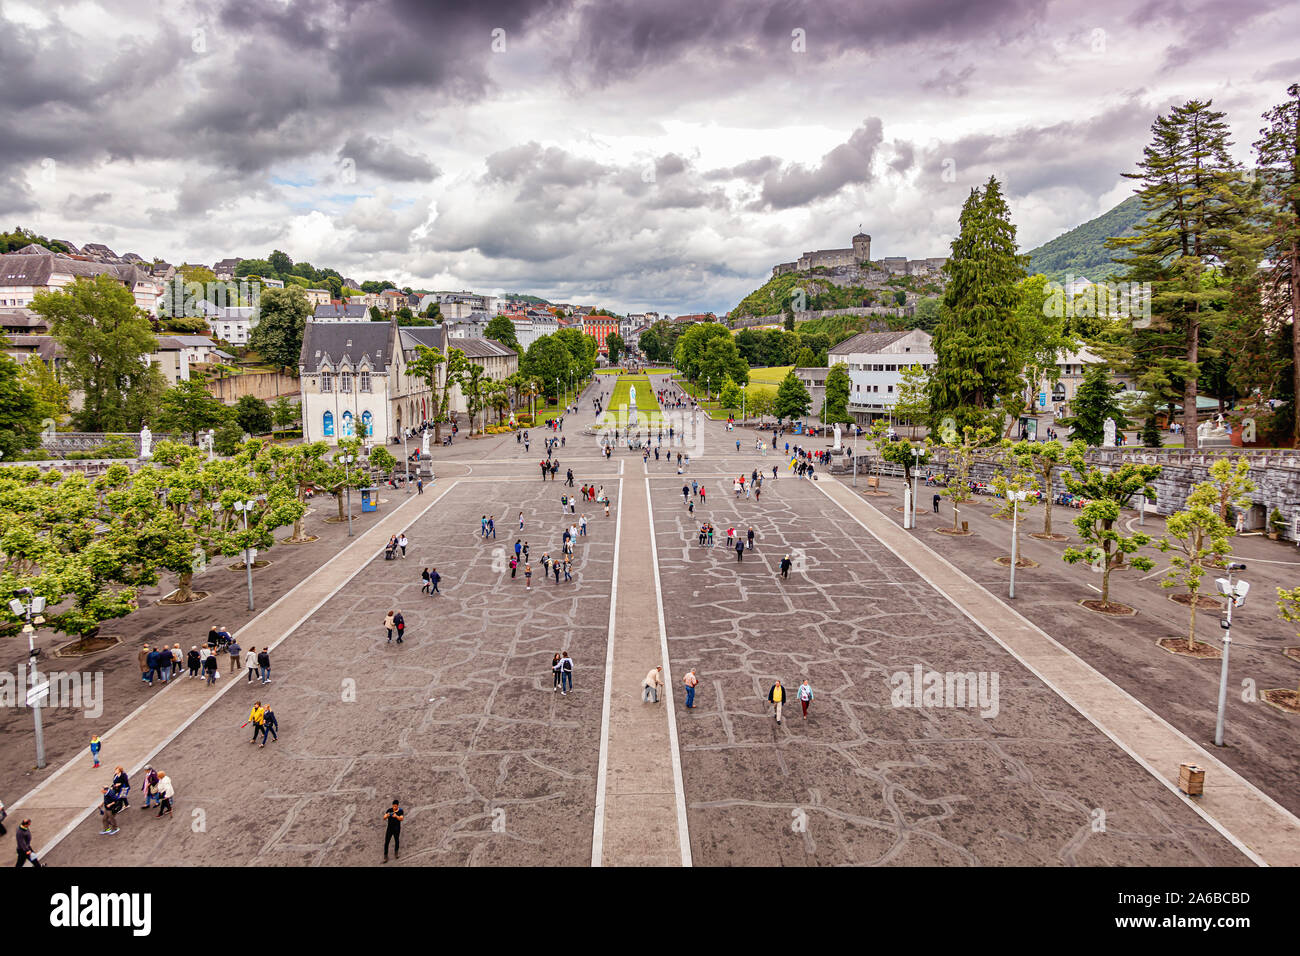 LOURDES - JUNE 15, 2019: Place of pilgrimage Lourdes in southern France Stock Photo